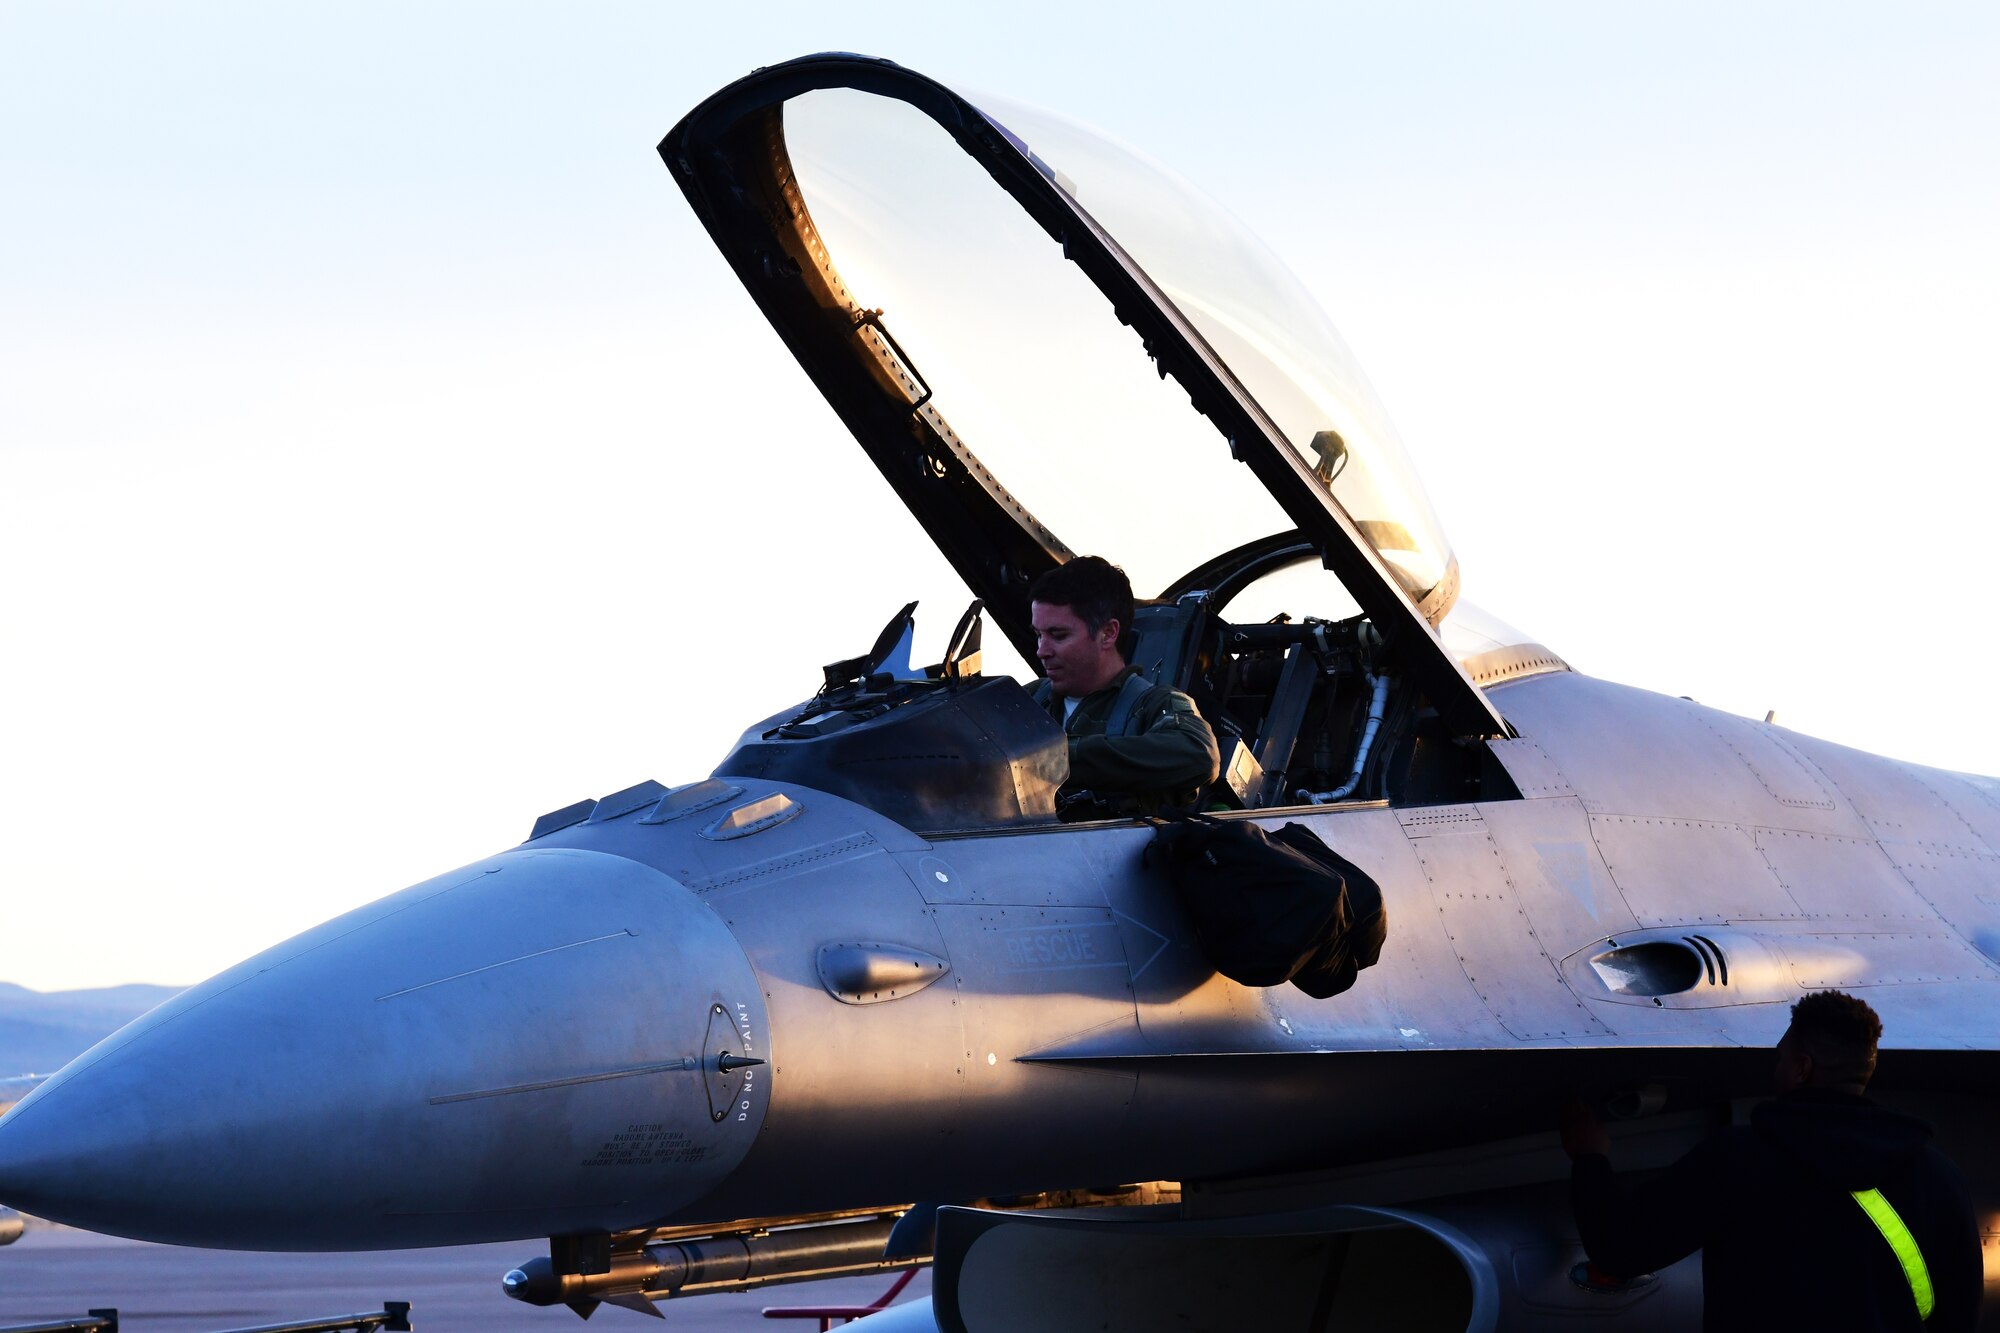 Maj. Christopher Arnott, 84th TES F-16 operational test and evaluation instructor pilot, prepares for flight to conduct Force Development Evaluations of multiple systems on the F-16, Dec. 15, Nellis Air Force Base, Nev. (U.S. Air Force Photo by Staff Sgt. Paige Yenke)